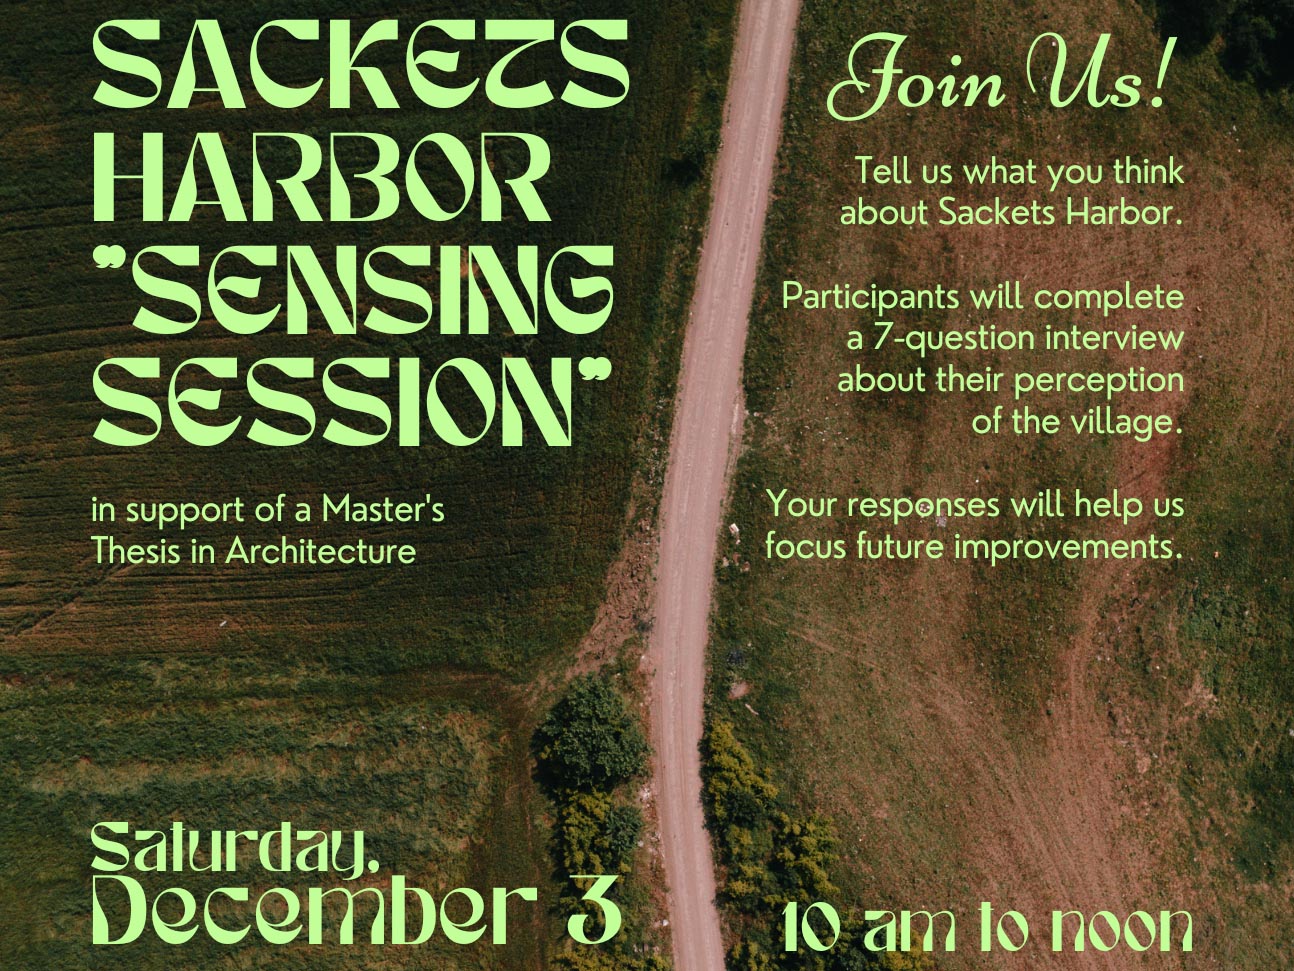 Cropped portion of the flyer for the Sackets Harbor Sensing Session